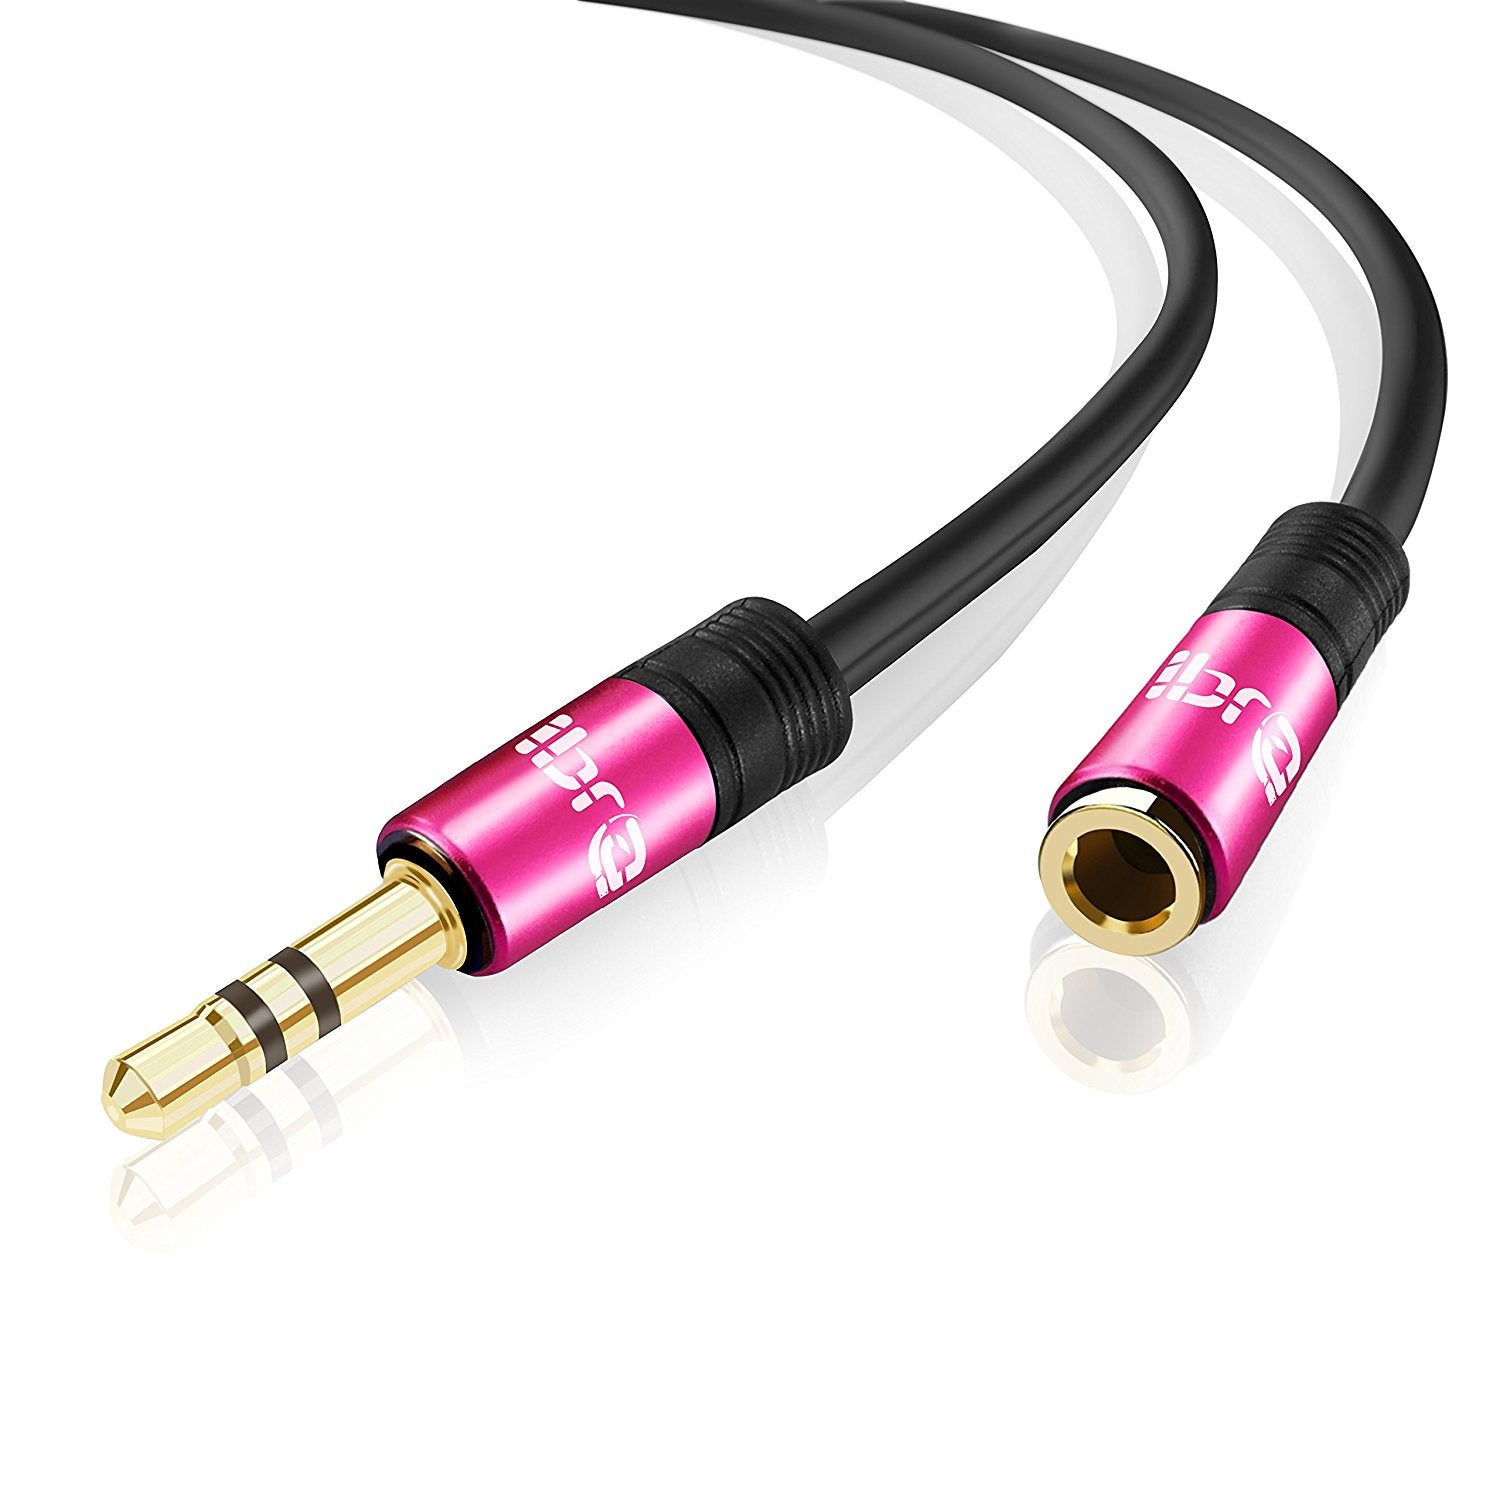 IBRA 2M Stereo Jack Extension Cable 3.5mm Male > 3.5mm Female - Pink